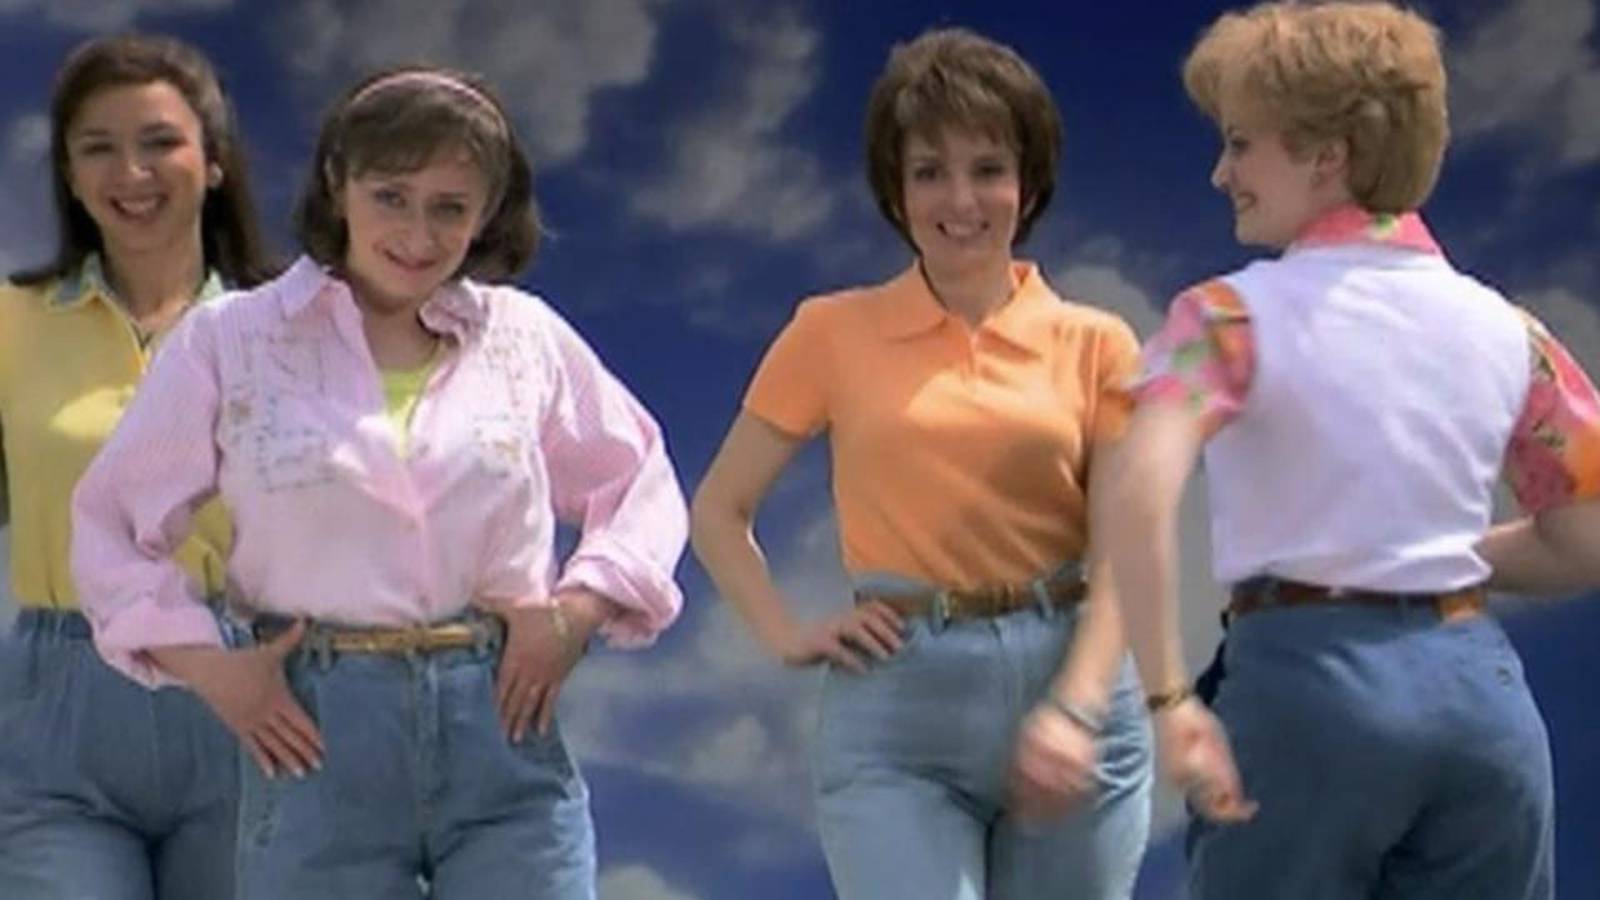 Throwback Thursday: Mom Jeans, The perfect gift for Mom this #MothersDay.  Watch the classic Mom Jeans sketch on the #SNL app: bit.ly/theSNLapp #tbt